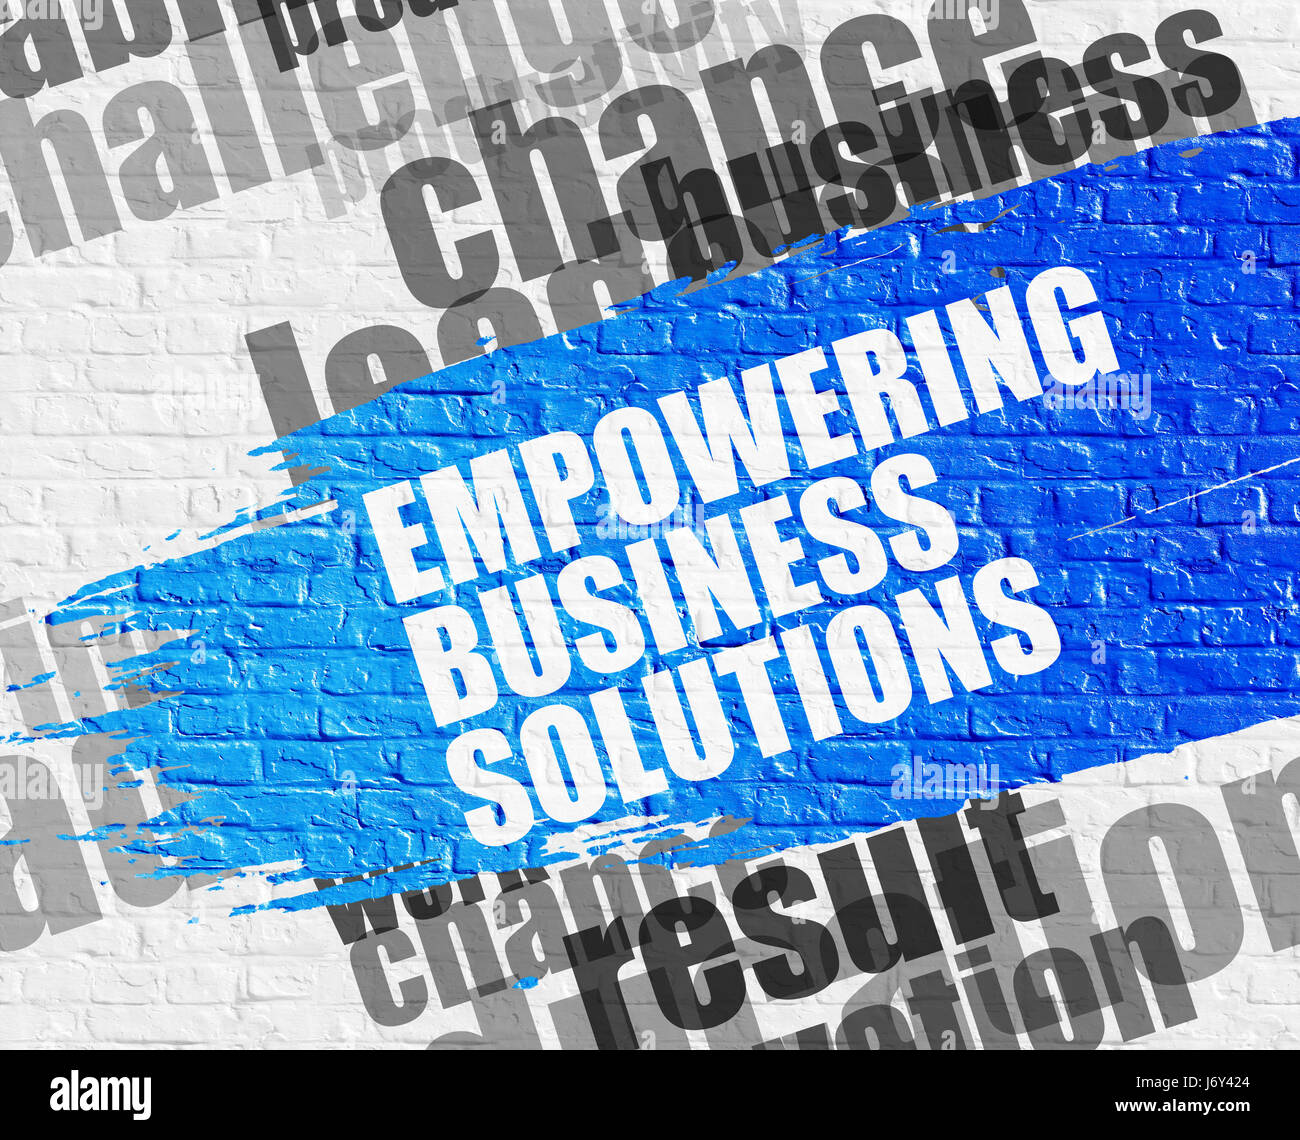 Empowering Business Solutions on White Wall. Stock Photo